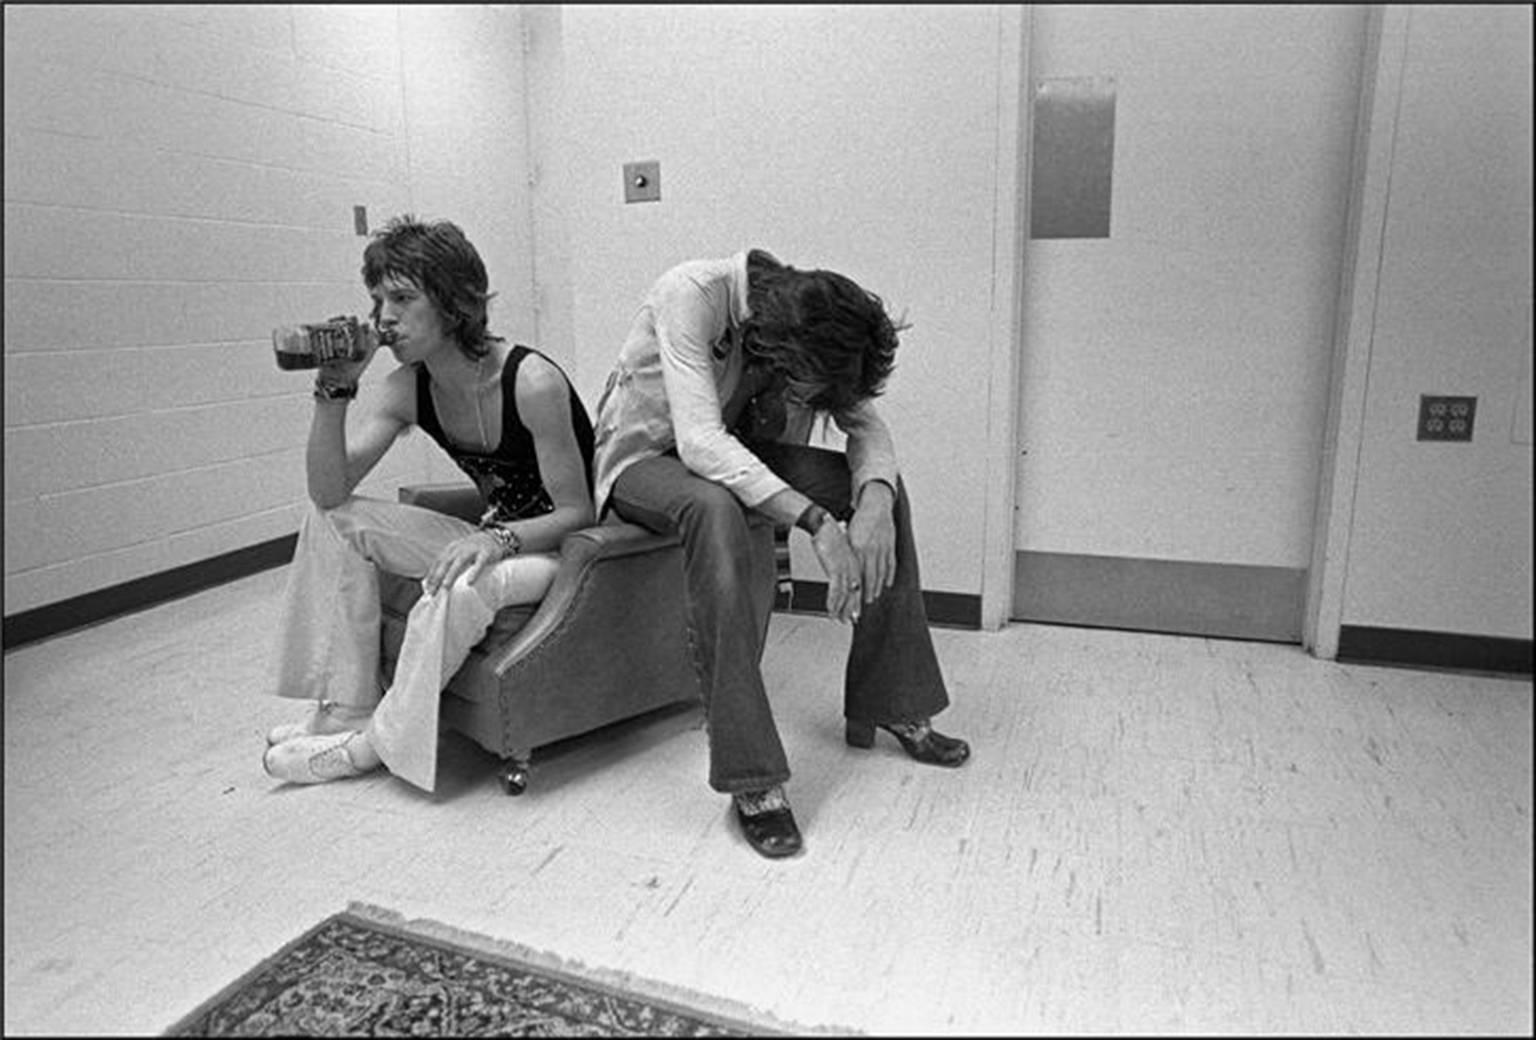 Ethan Russell Black and White Photograph - Mick Jagger and Keith Richards, U.S. Tour 1972